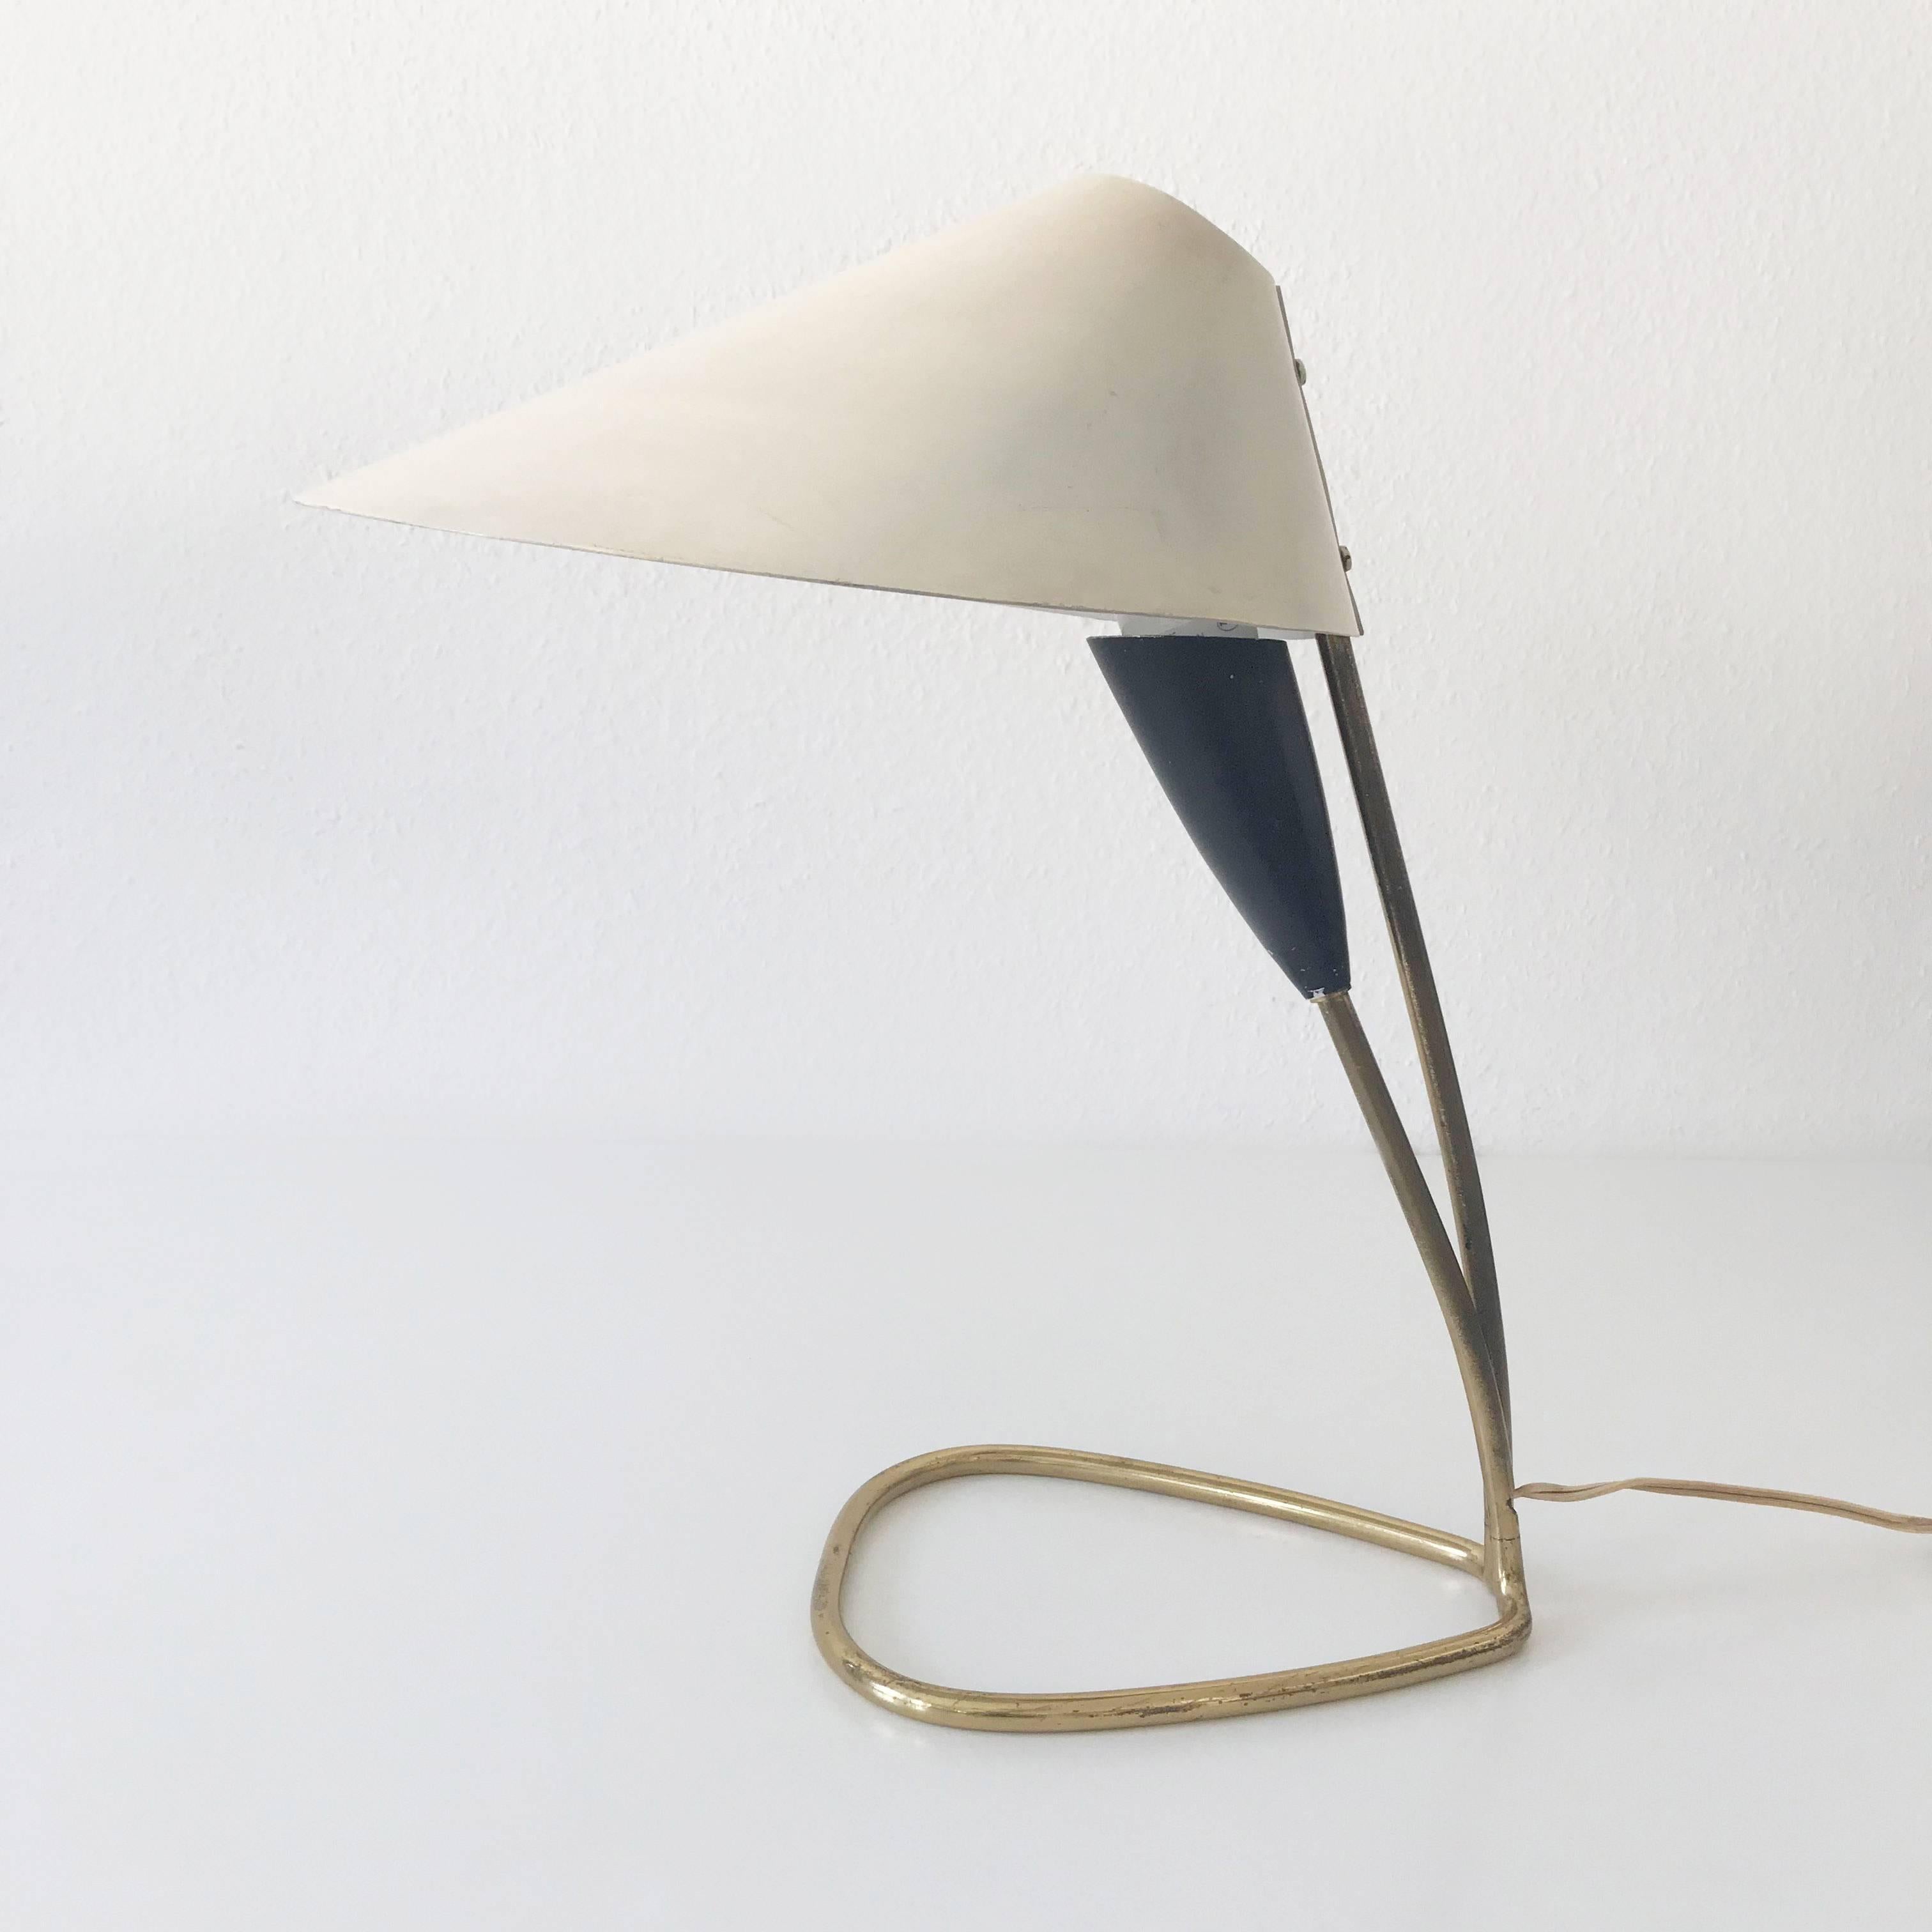 Elegant and rare Mid-Century Modern table lamp or desk light. Designed and manufactured probably in Italy in 1950s. 

Executed in brass and aluminium, the lamp needs 1 x E27 / E26 Edison screw fit bulb. It is wired, in working condition and runs